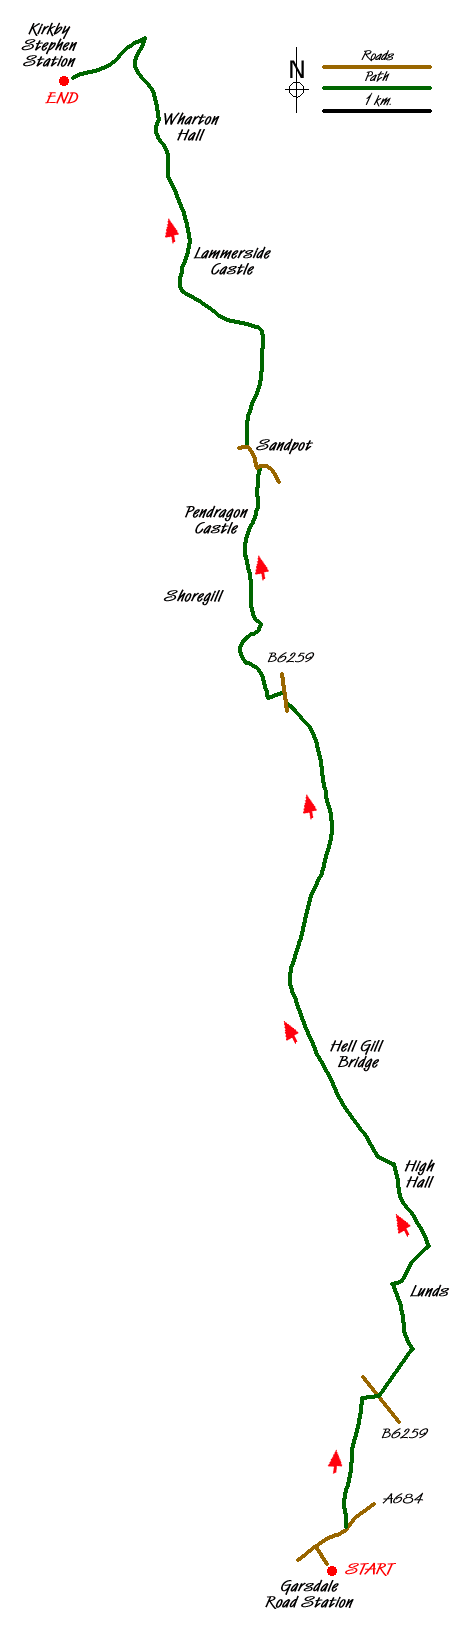 Walk 2409 Route Map